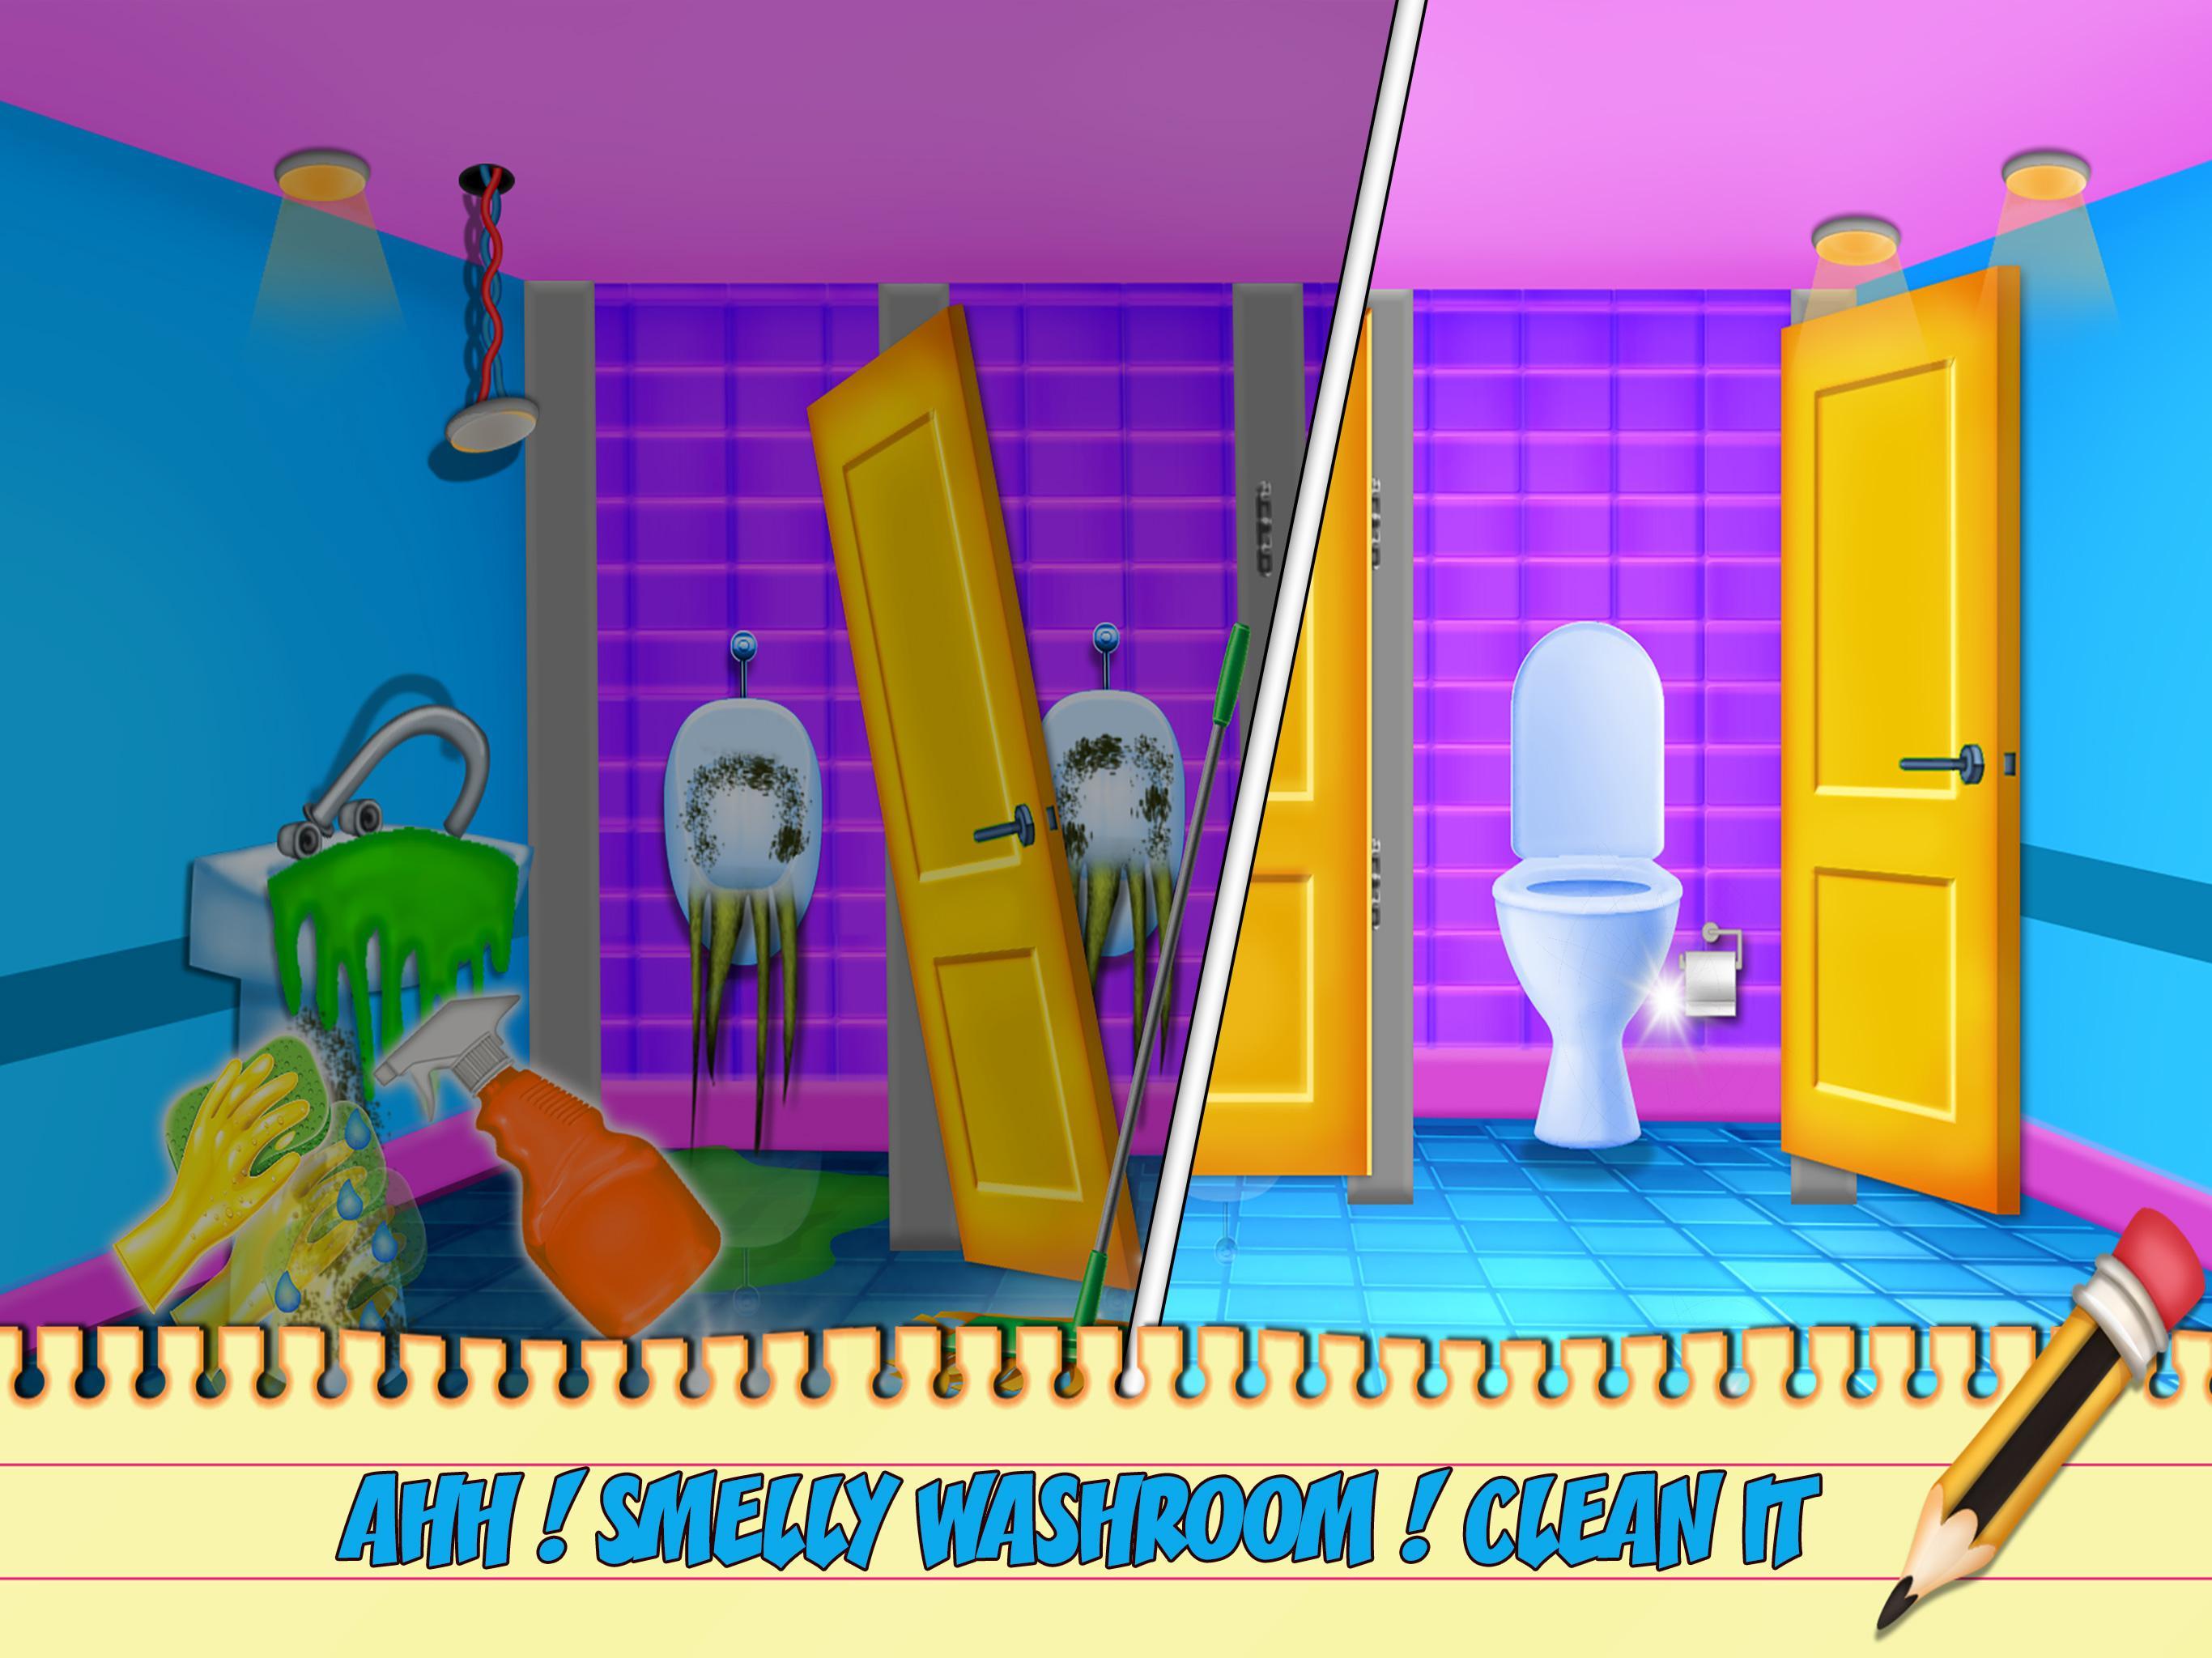 Clean up room. Office Cleaning игра. Уборка в офисе игры. Clean up Roblox. Clean Mind clean Room Oh Мем.